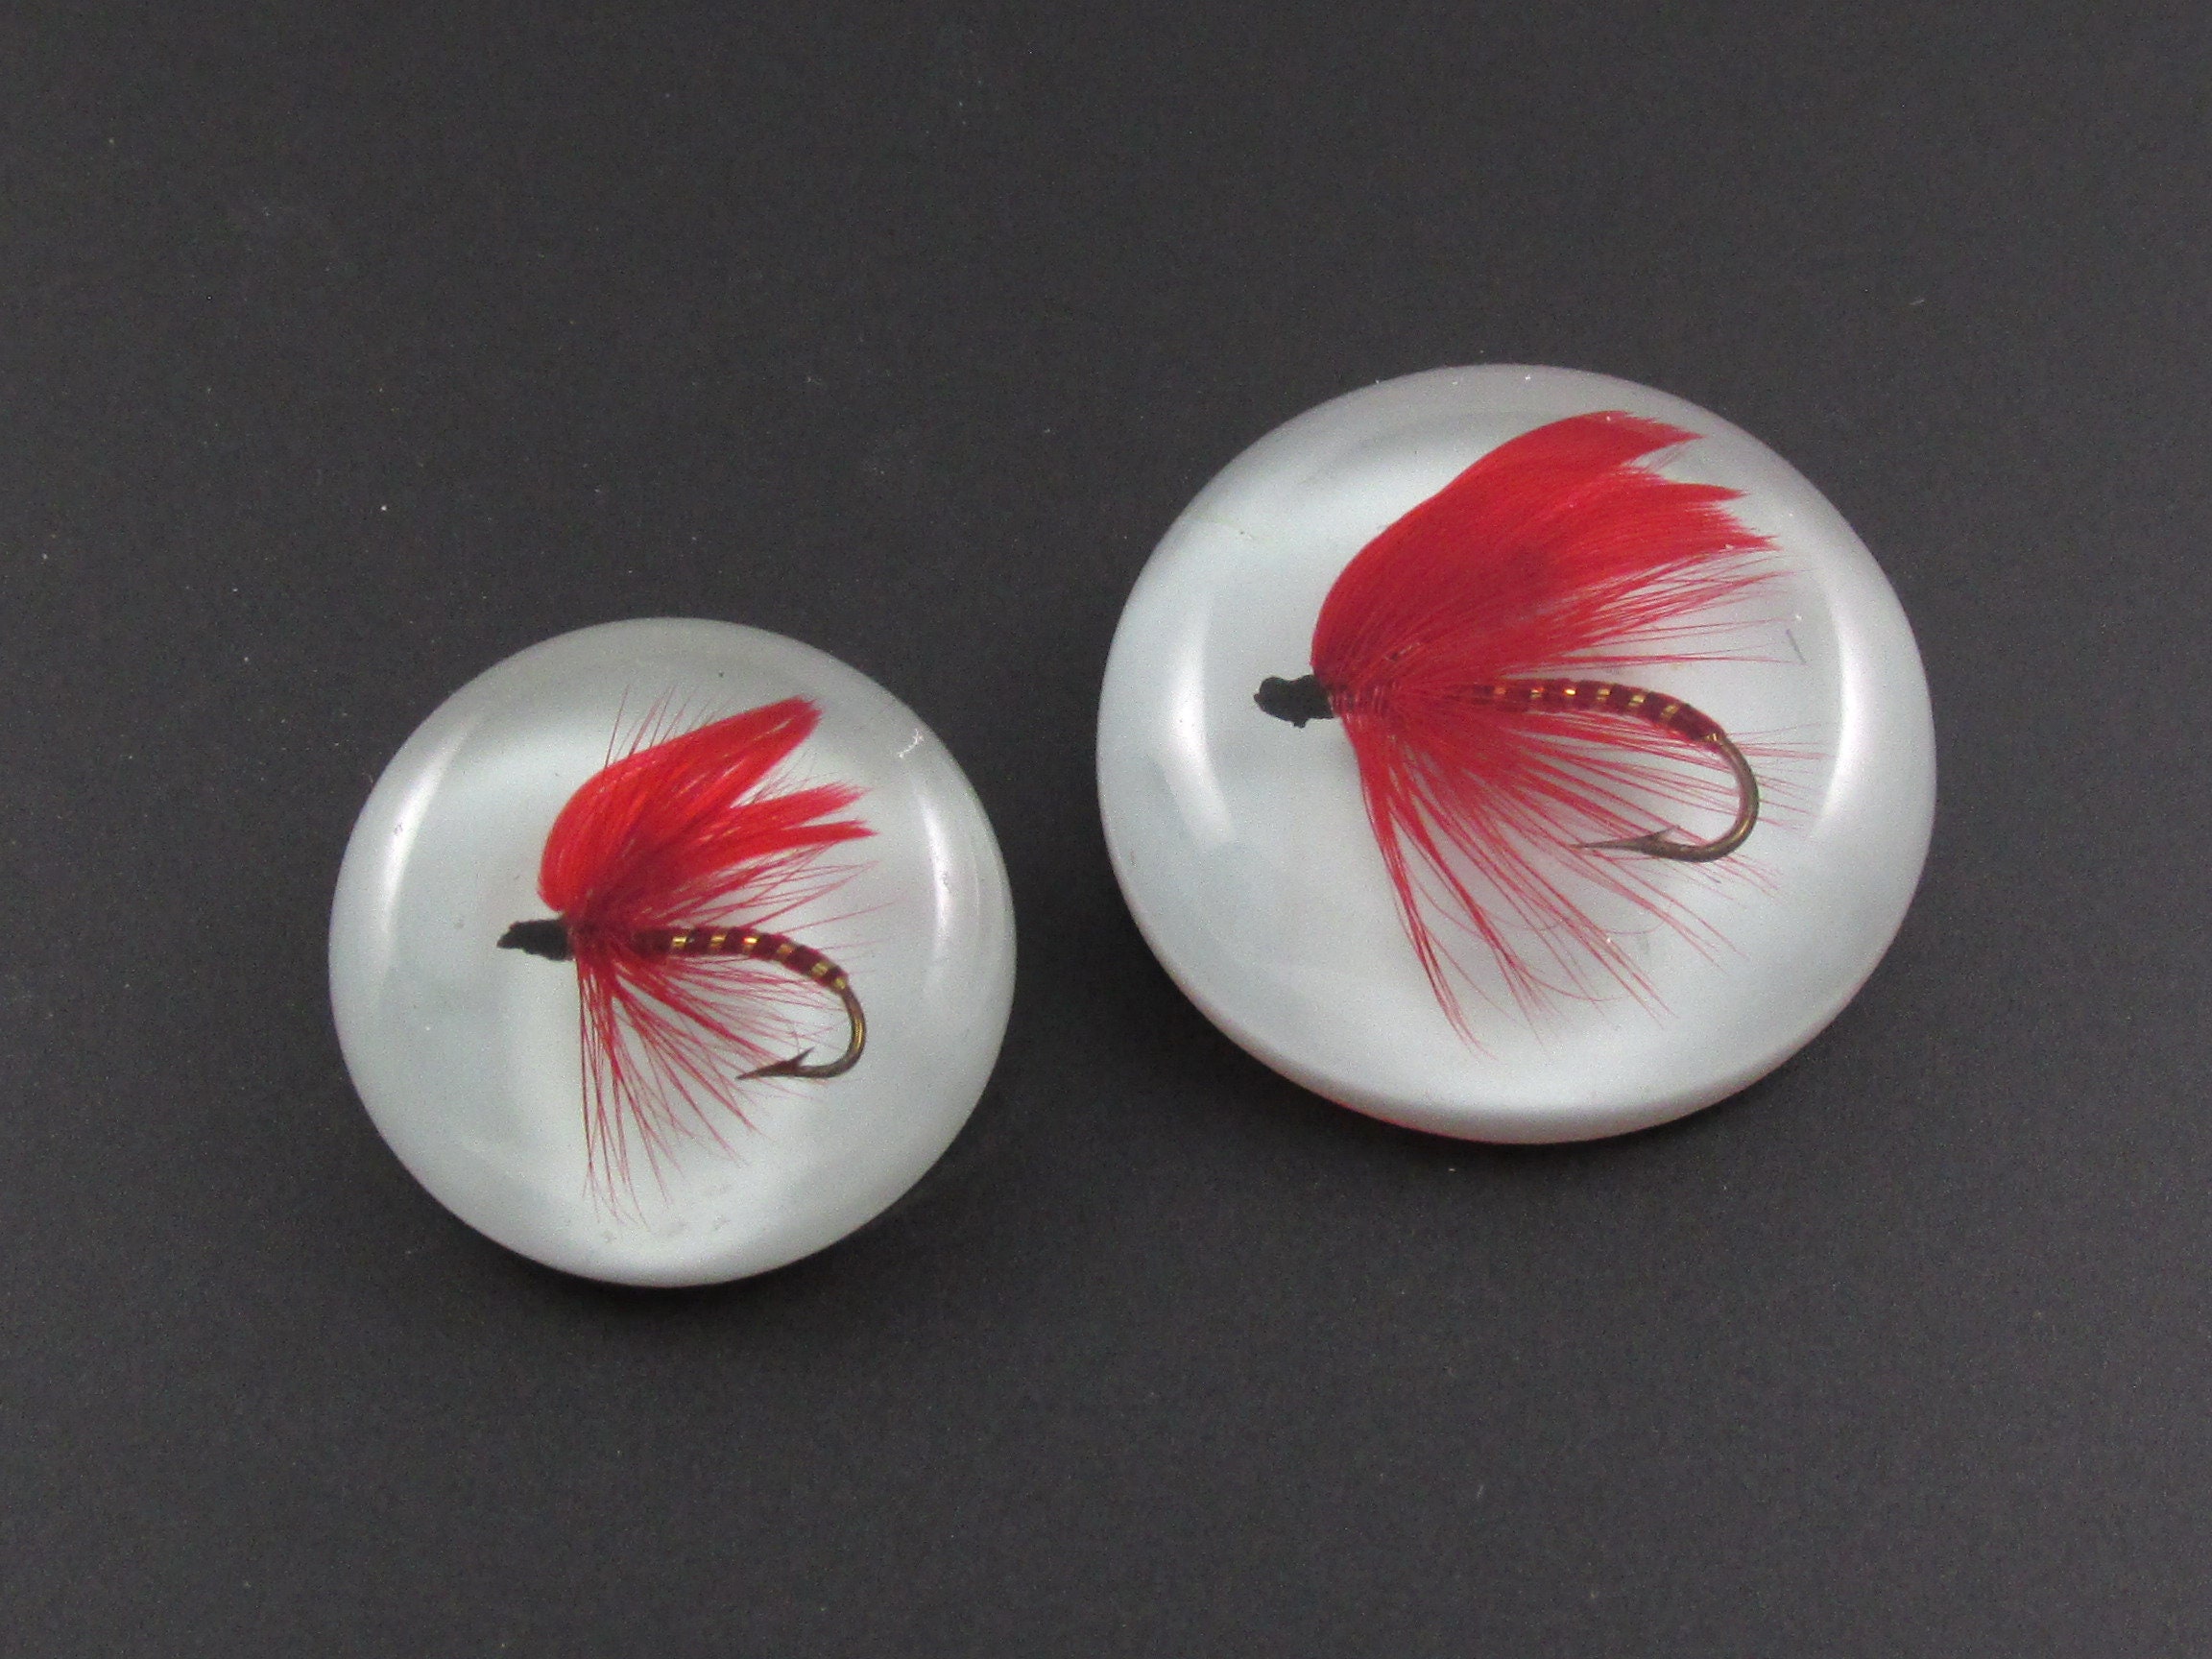 Fly Fishing Brooch, Fly Fishing Pin Set, Lucite Brooch, Fishing Fly Brooch, Fishing Brooch, Fishing Lure Brooch